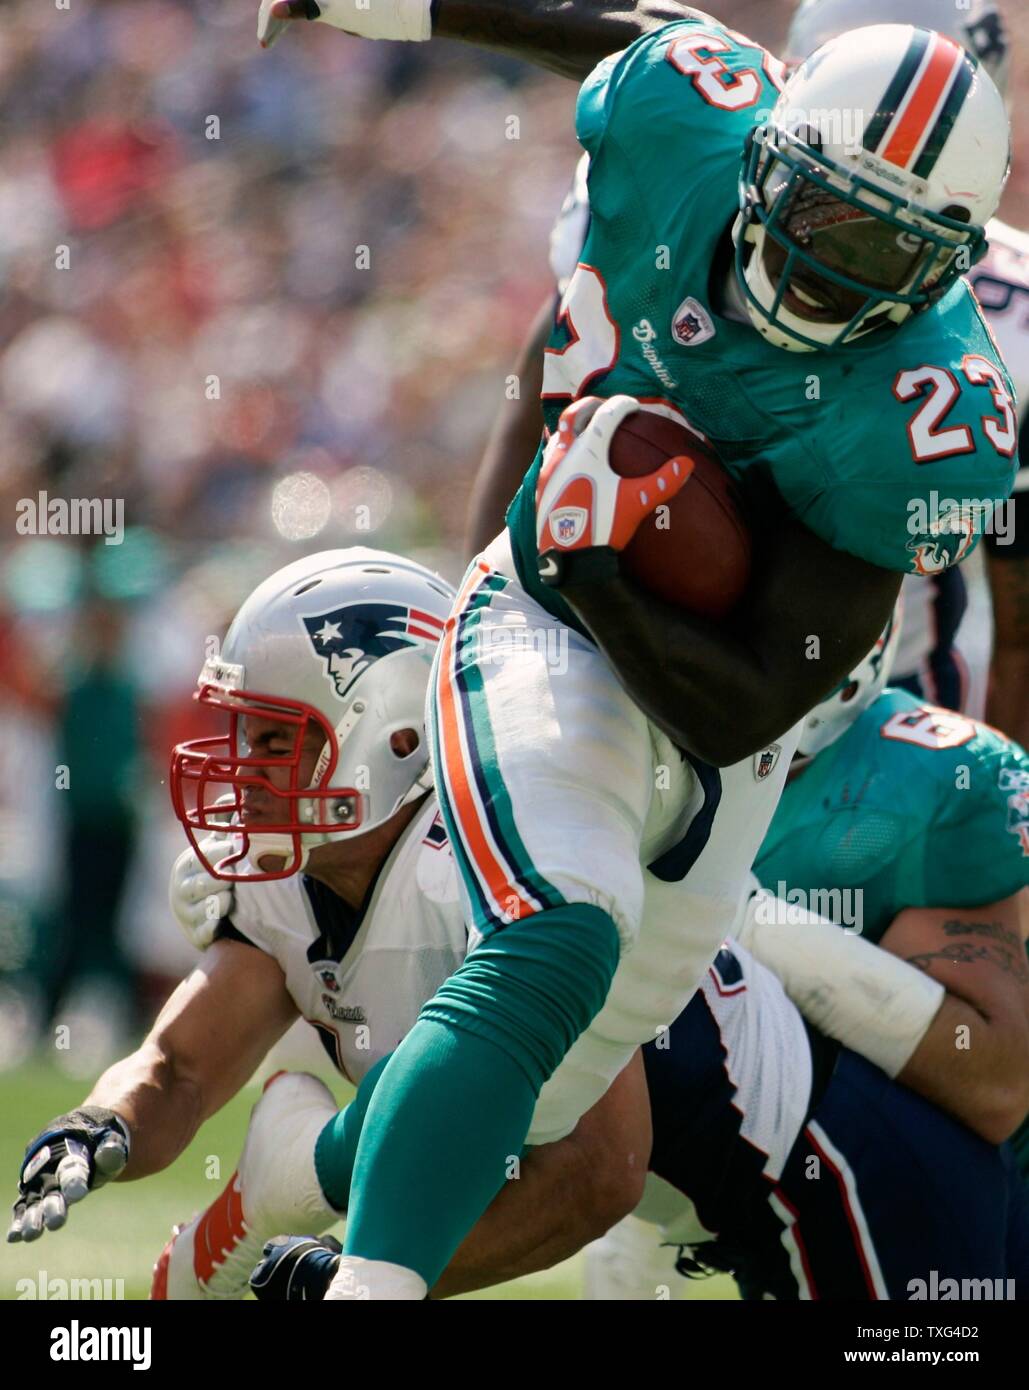 21 December 2008: Dolphins Pro Bowl bound running back Ronnie Brown is a  decoy on this play as he fakes making a reception. On the second coldest  day in Arrowhead history with